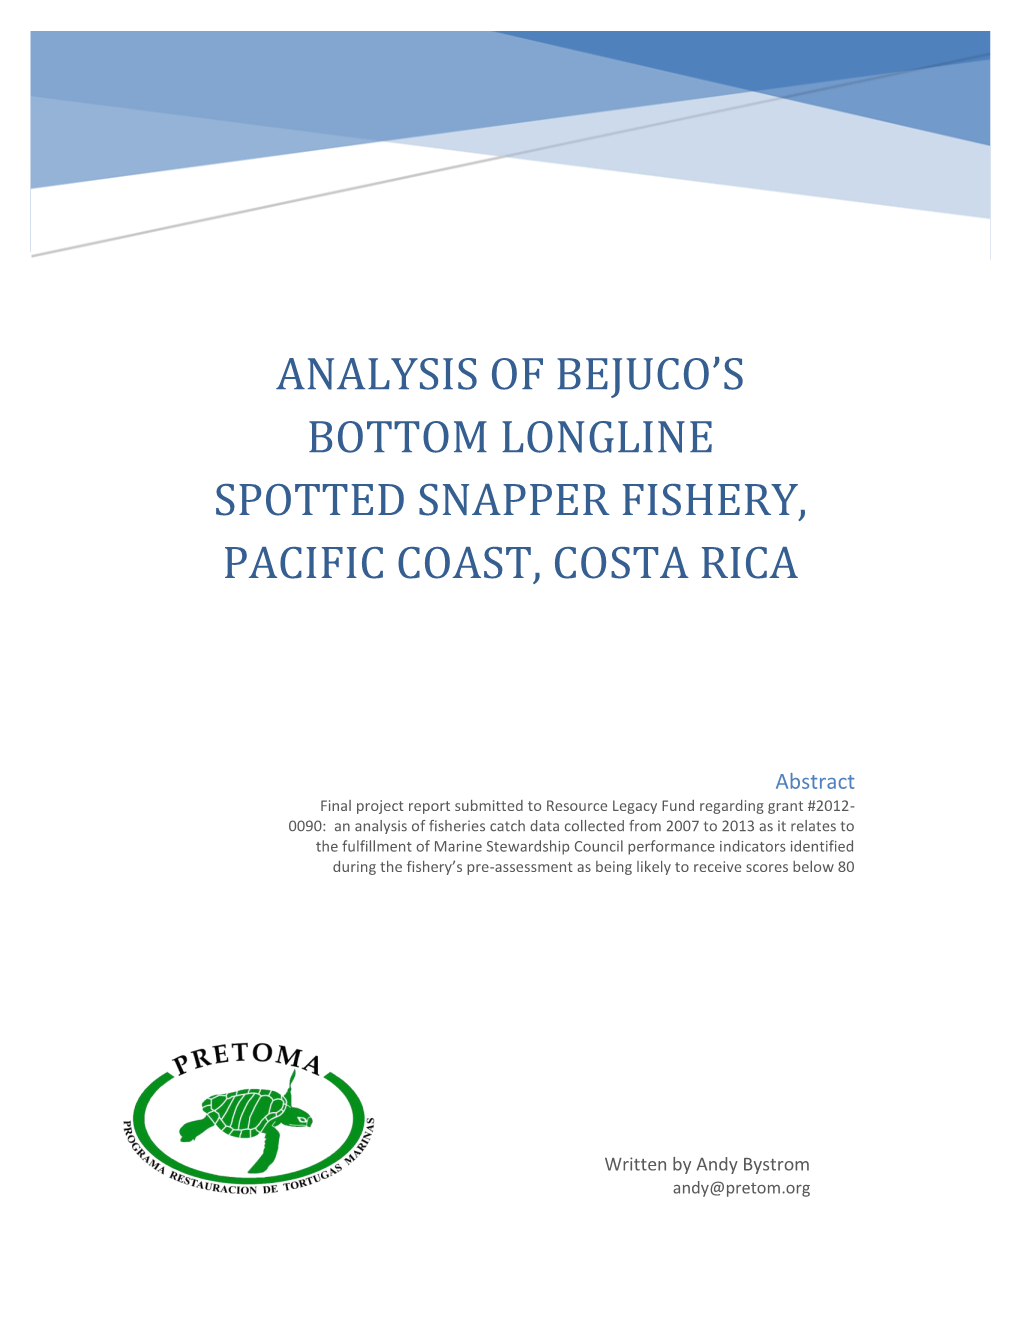 Analysis of Bejuco's Bottom Longline Spotted Snapper